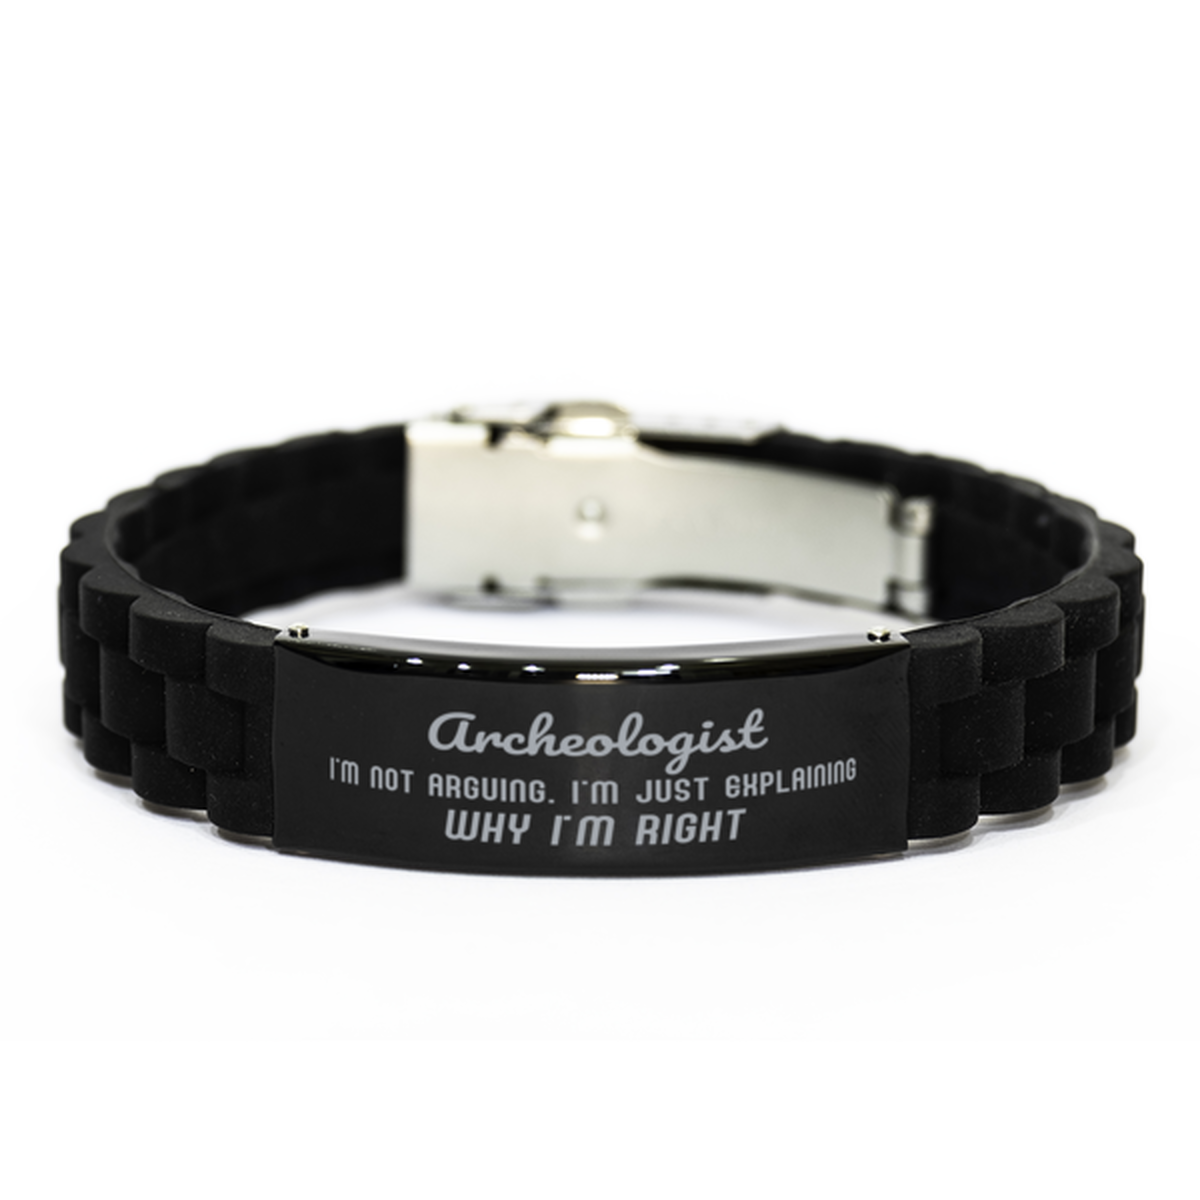 Archeologist I'm not Arguing. I'm Just Explaining Why I'm RIGHT Black Glidelock Clasp Bracelet, Funny Saying Quote Archeologist Gifts For Archeologist Graduation Birthday Christmas Gifts for Men Women Coworker